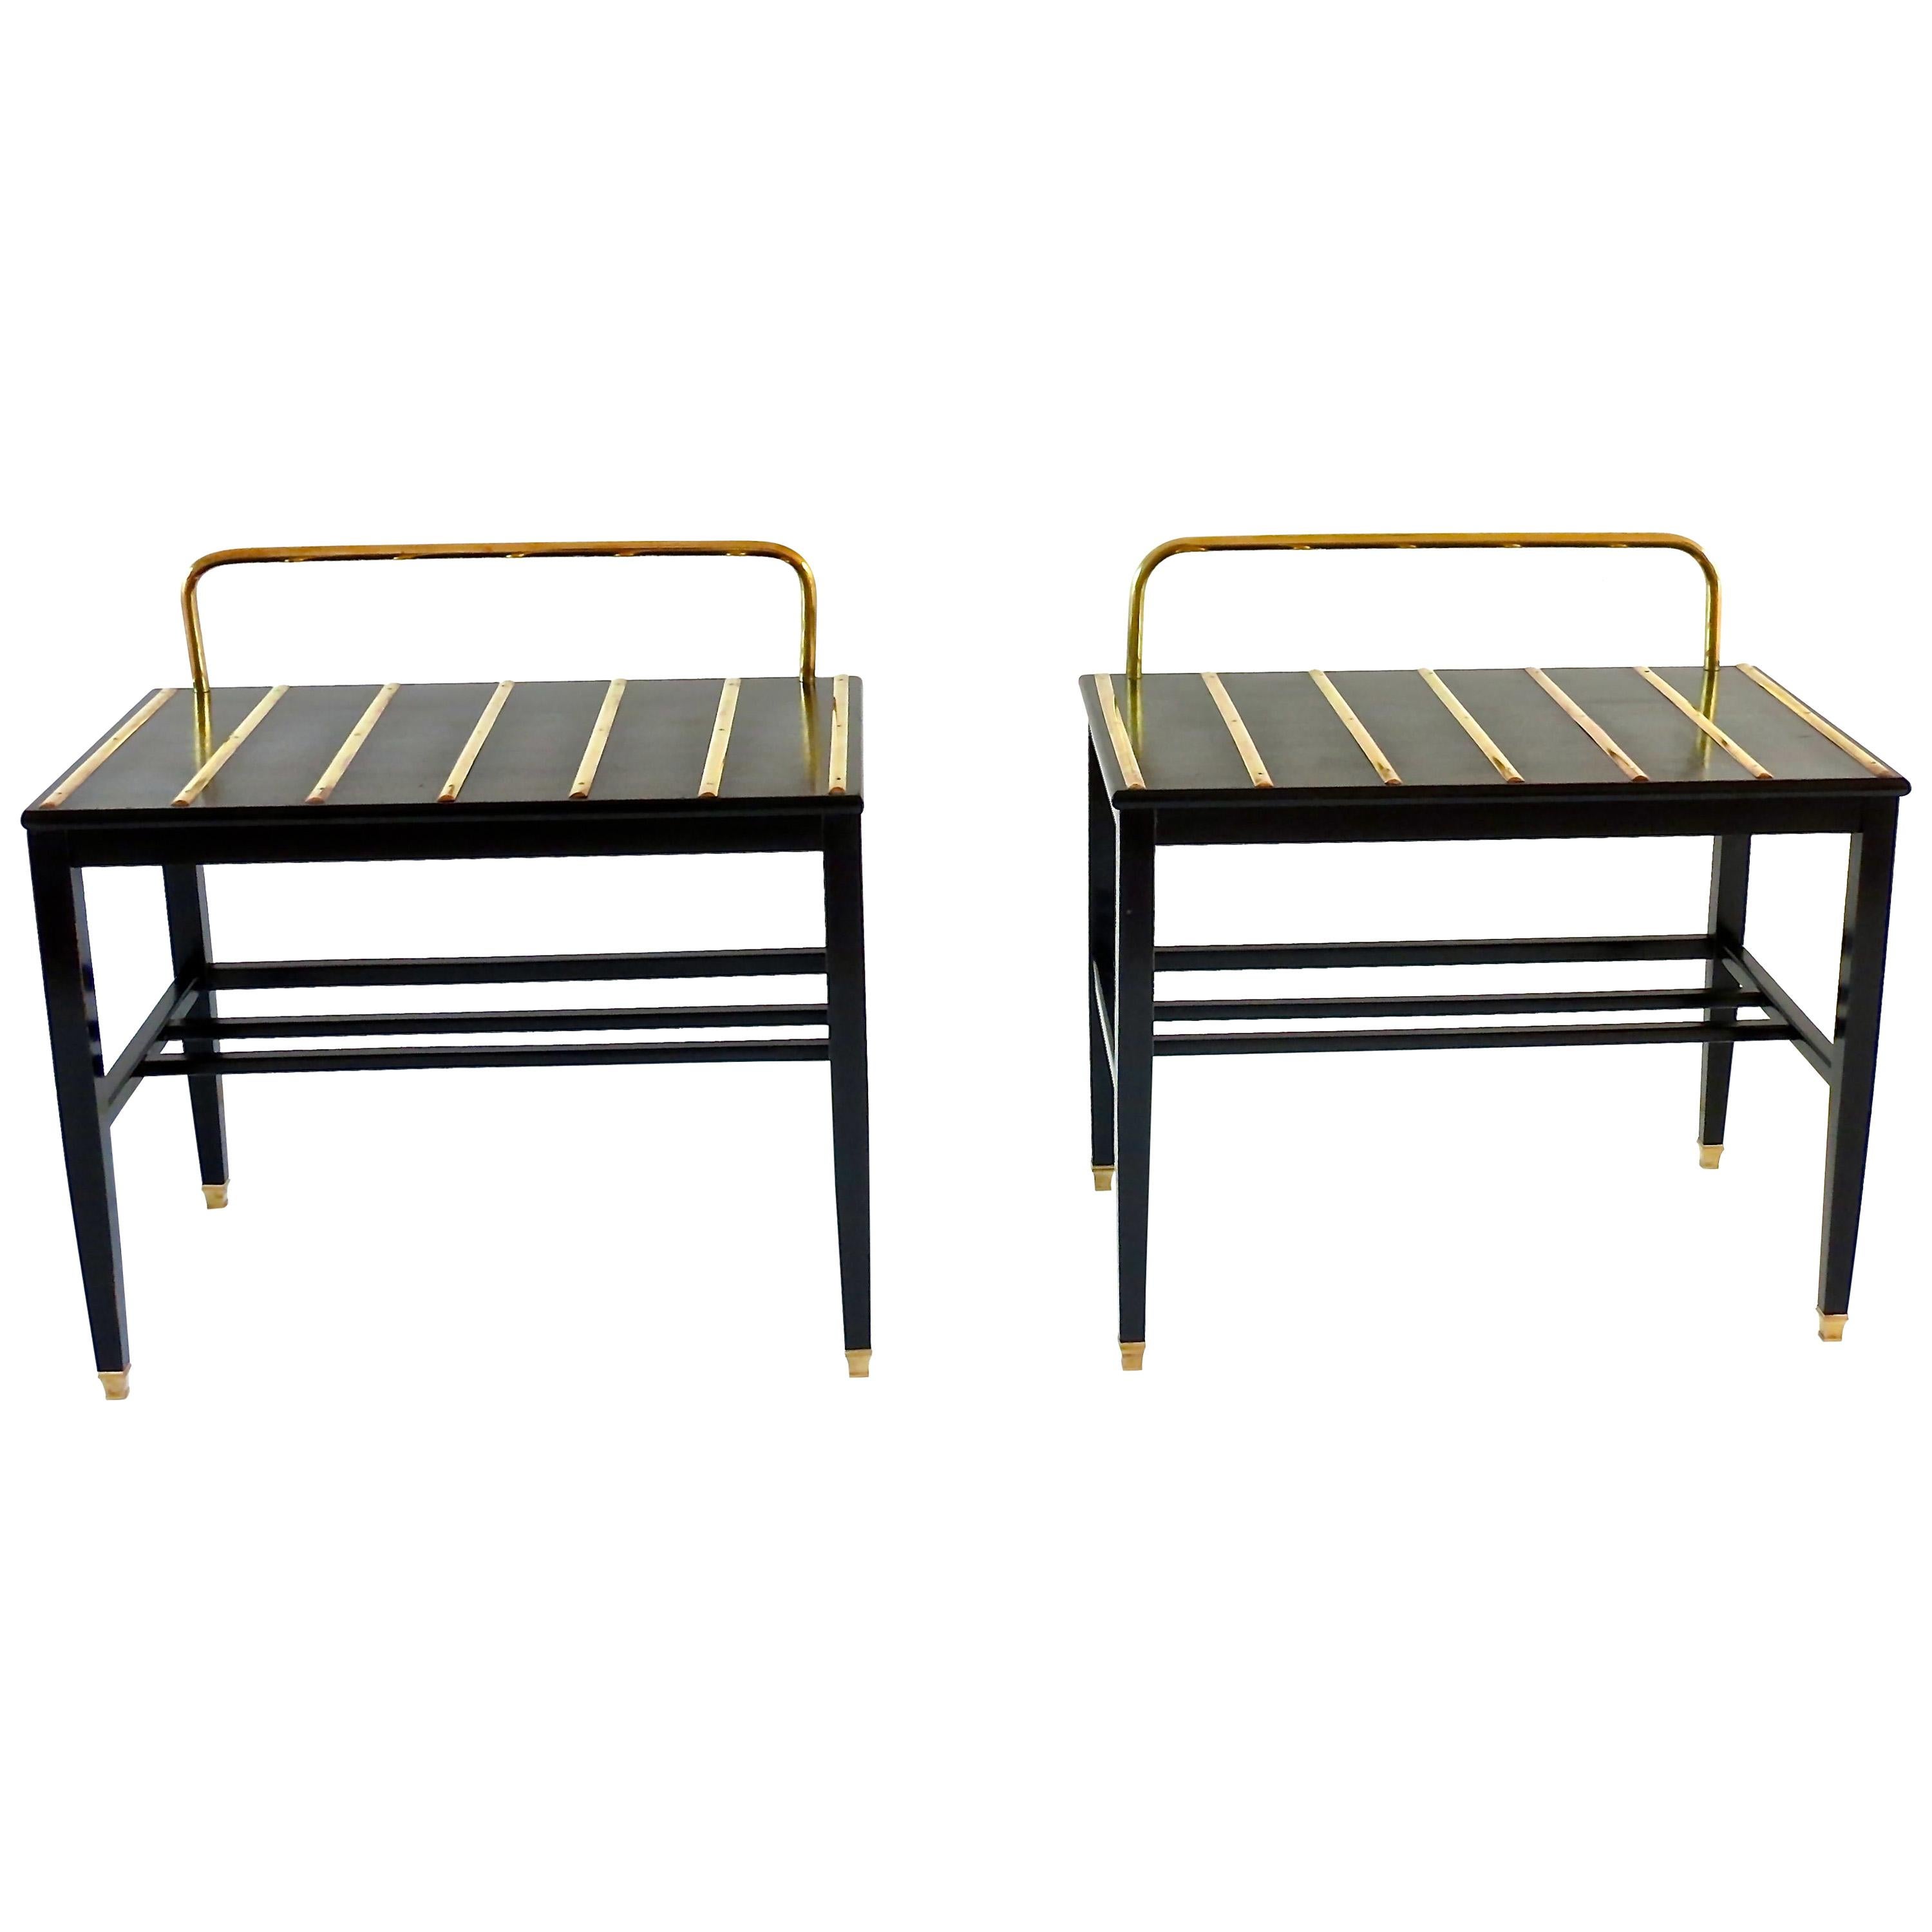 Pair of Gio Ponti Black Walnut Lacquered Side Tables from Hotel Royal Naples For Sale